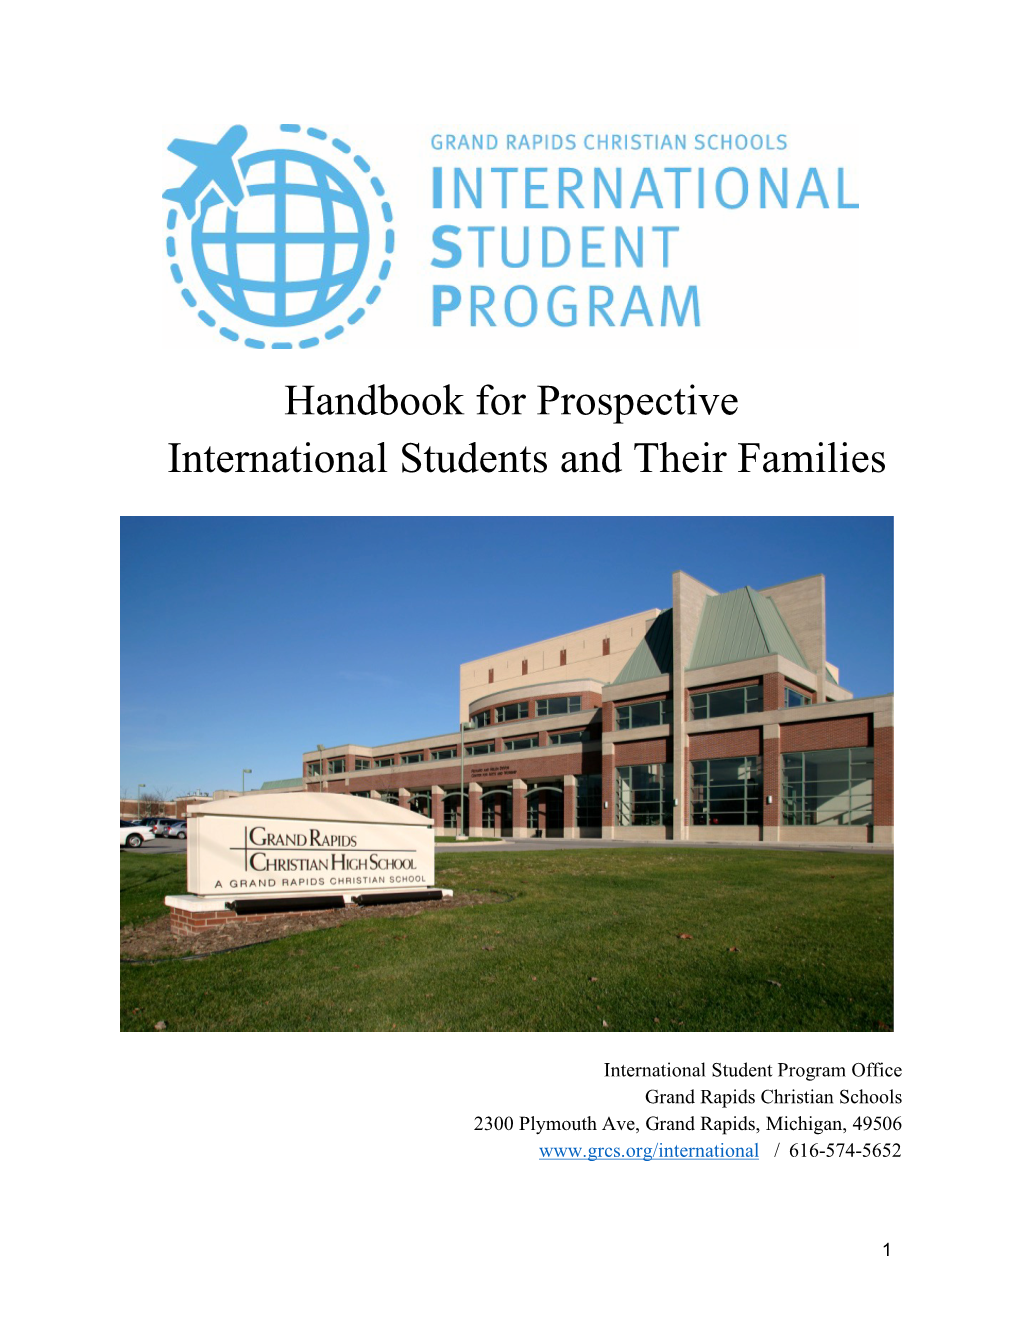 Handbook for Prospective International Students and Their Families